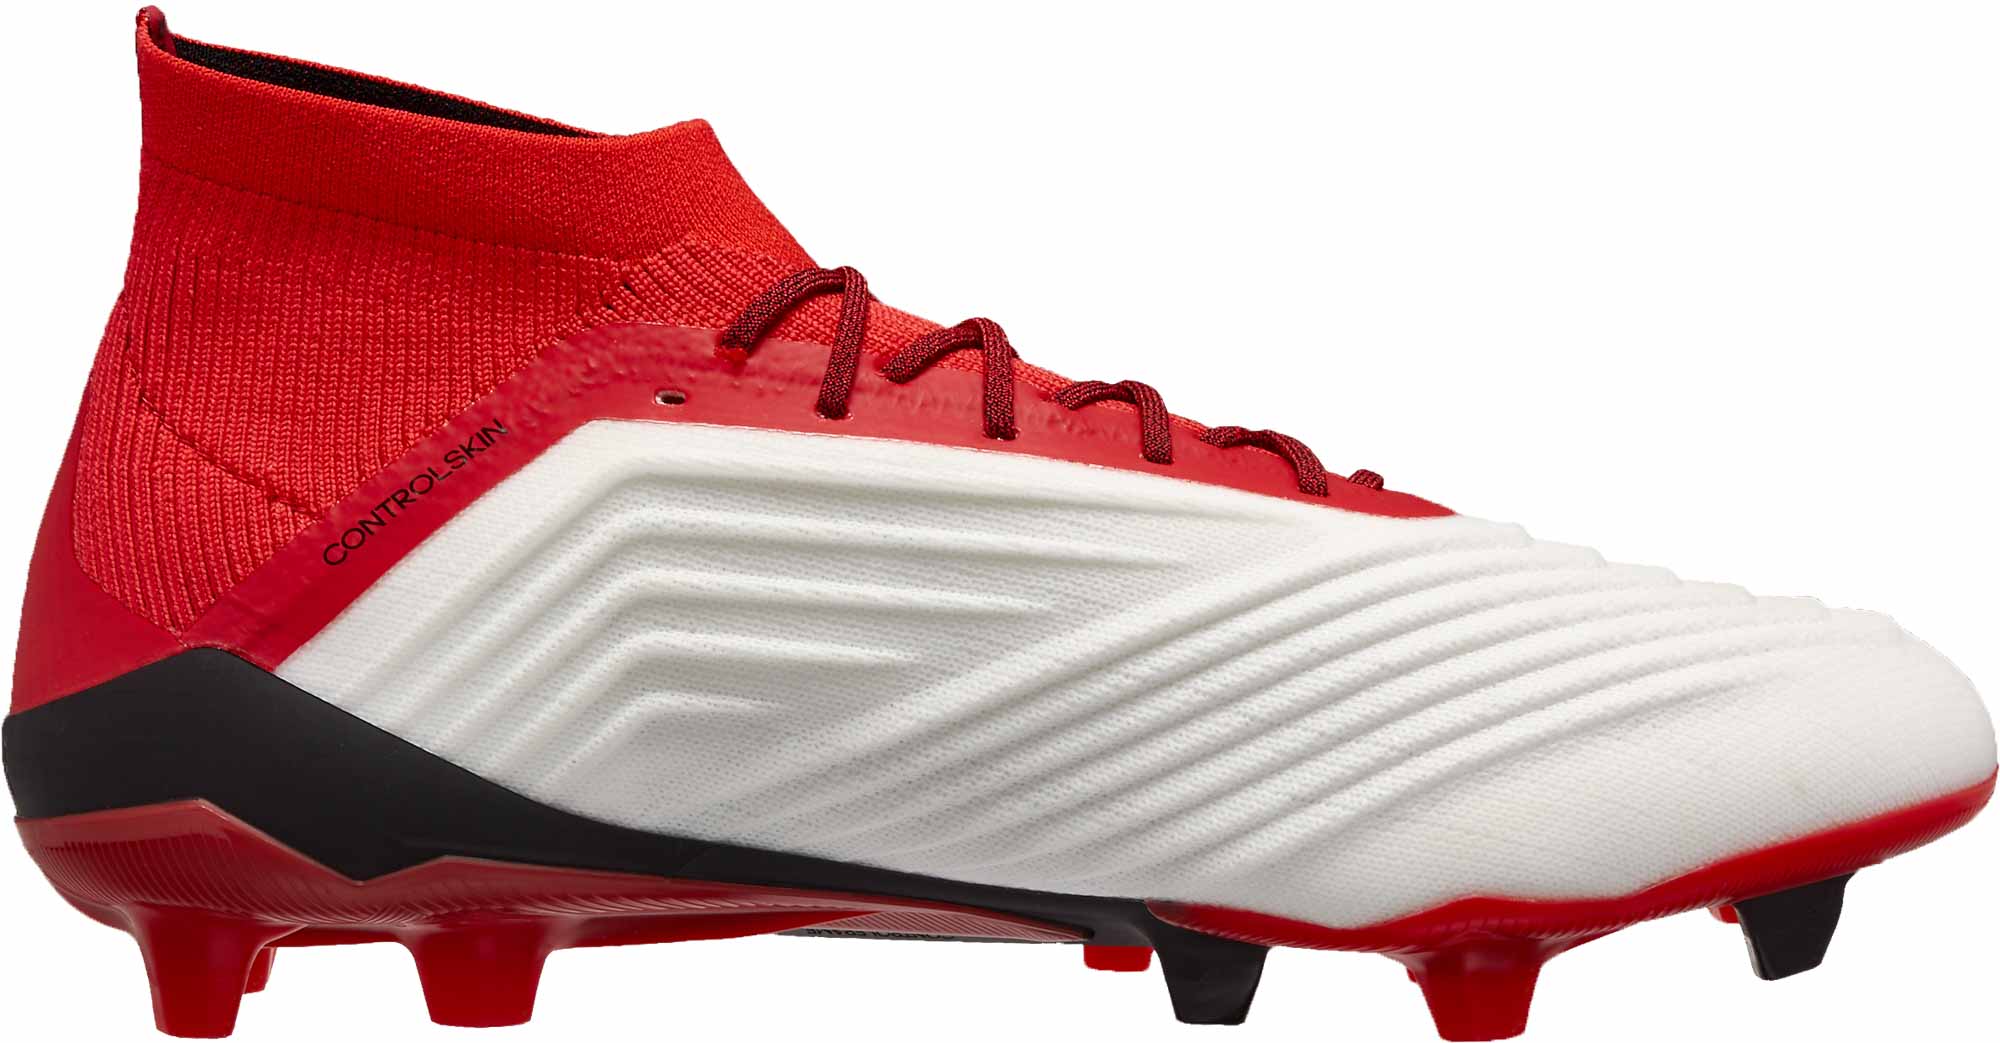 adidas Predator 18.1 Cold Blooded Pack